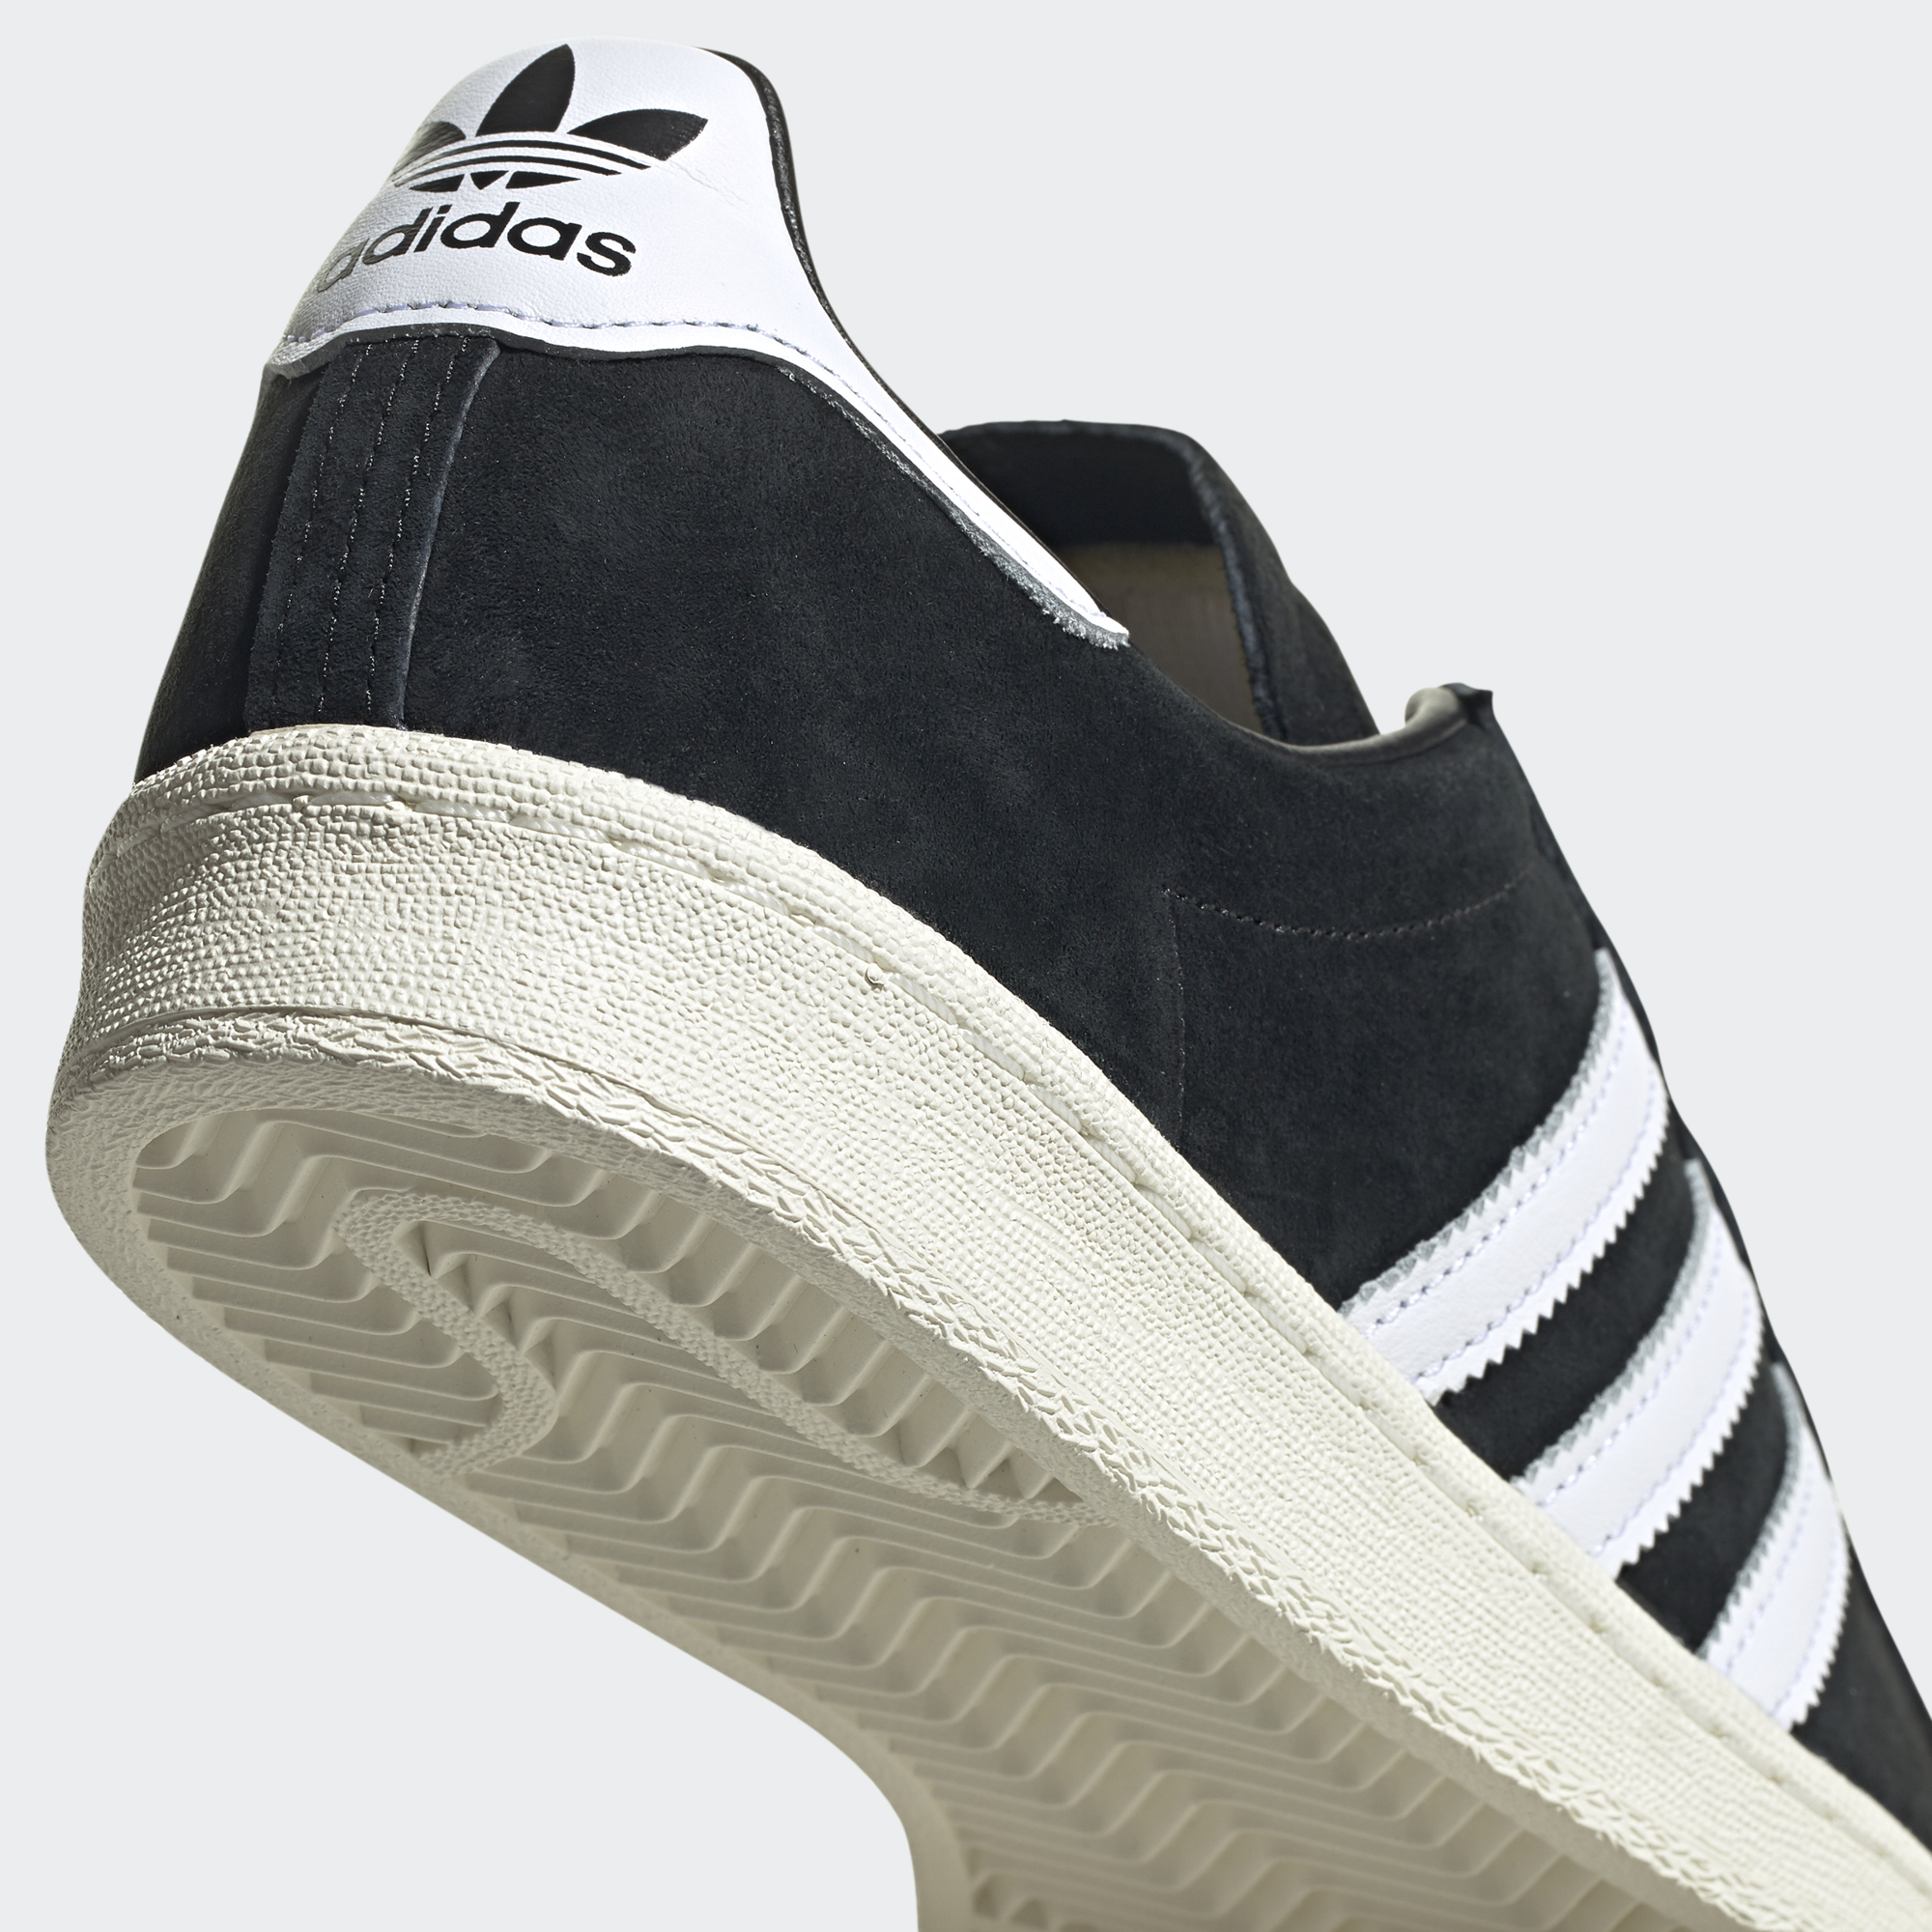 CAMPUS 80S SHOES - CORE BLACK / FTWR WHITE / OFF WHITE | MEN | adidas Hong  Kong Official Online Store